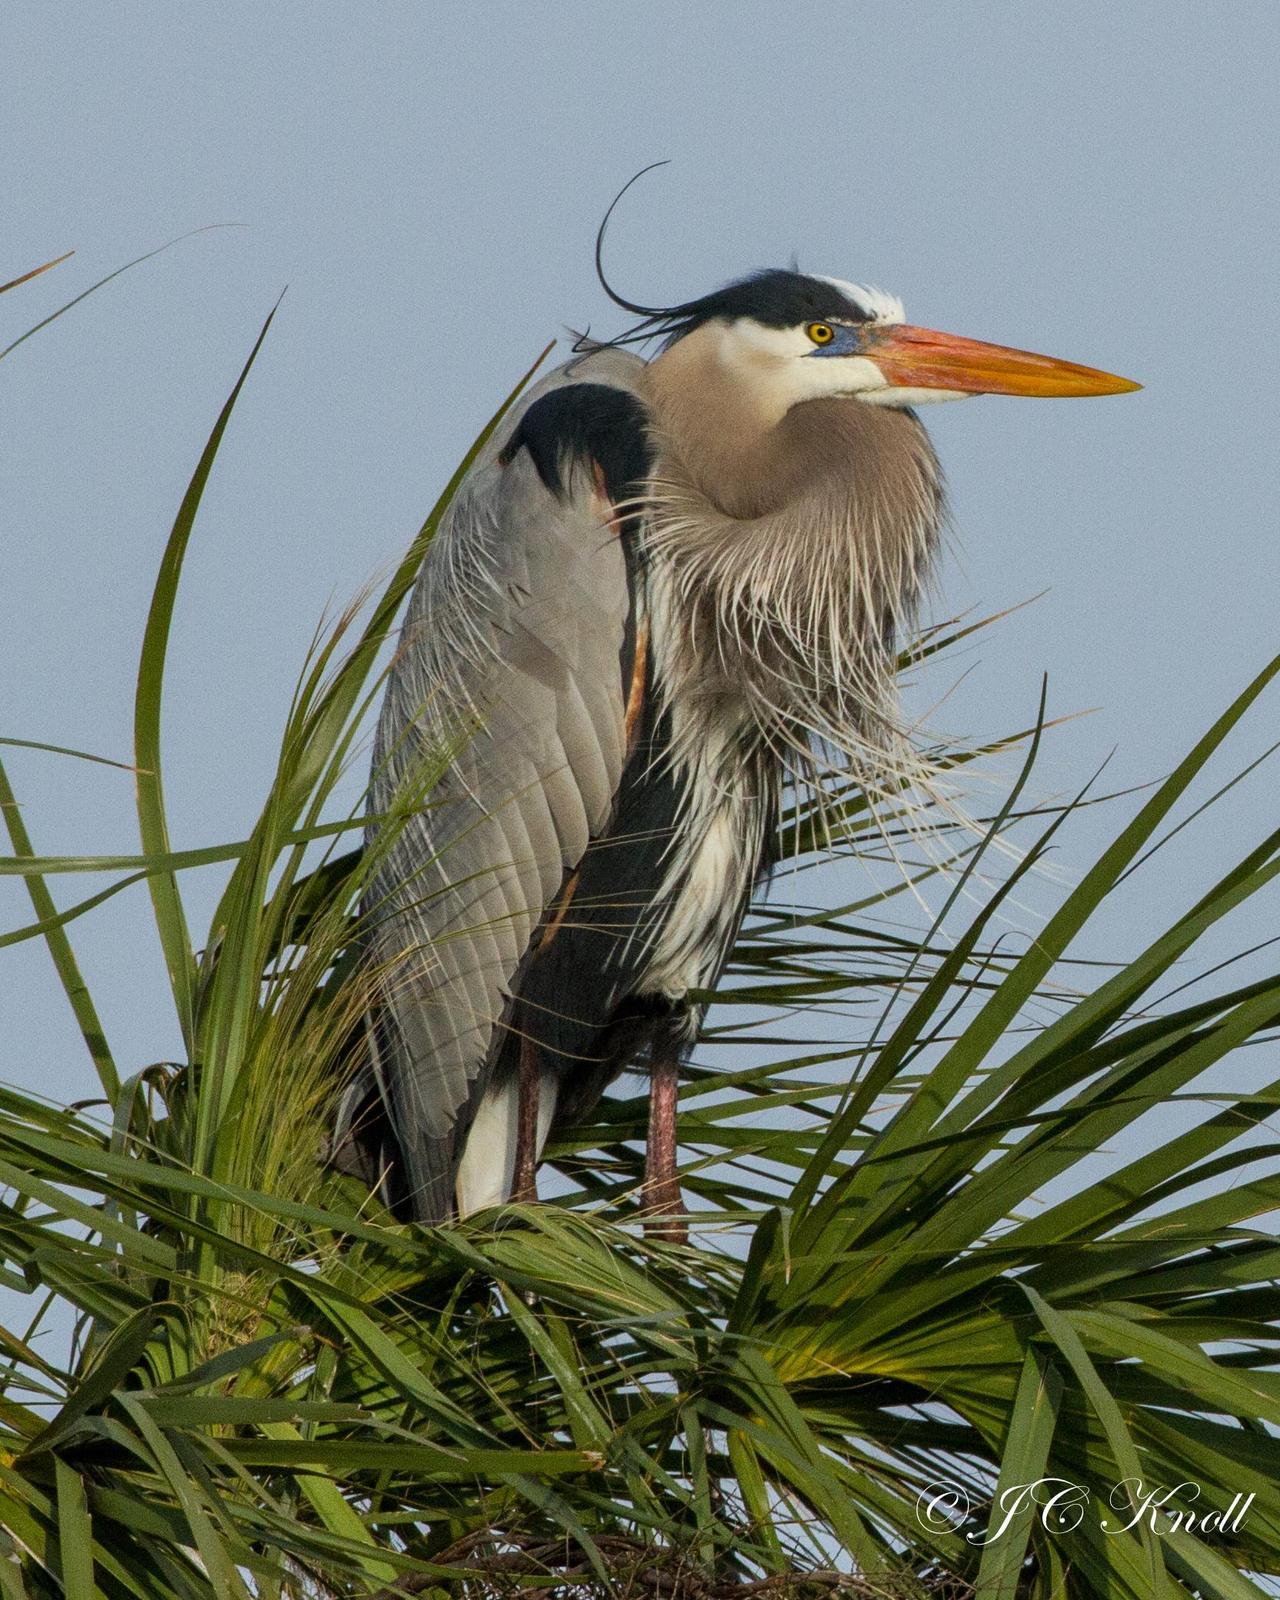 Great Blue Heron Photo by JC Knoll